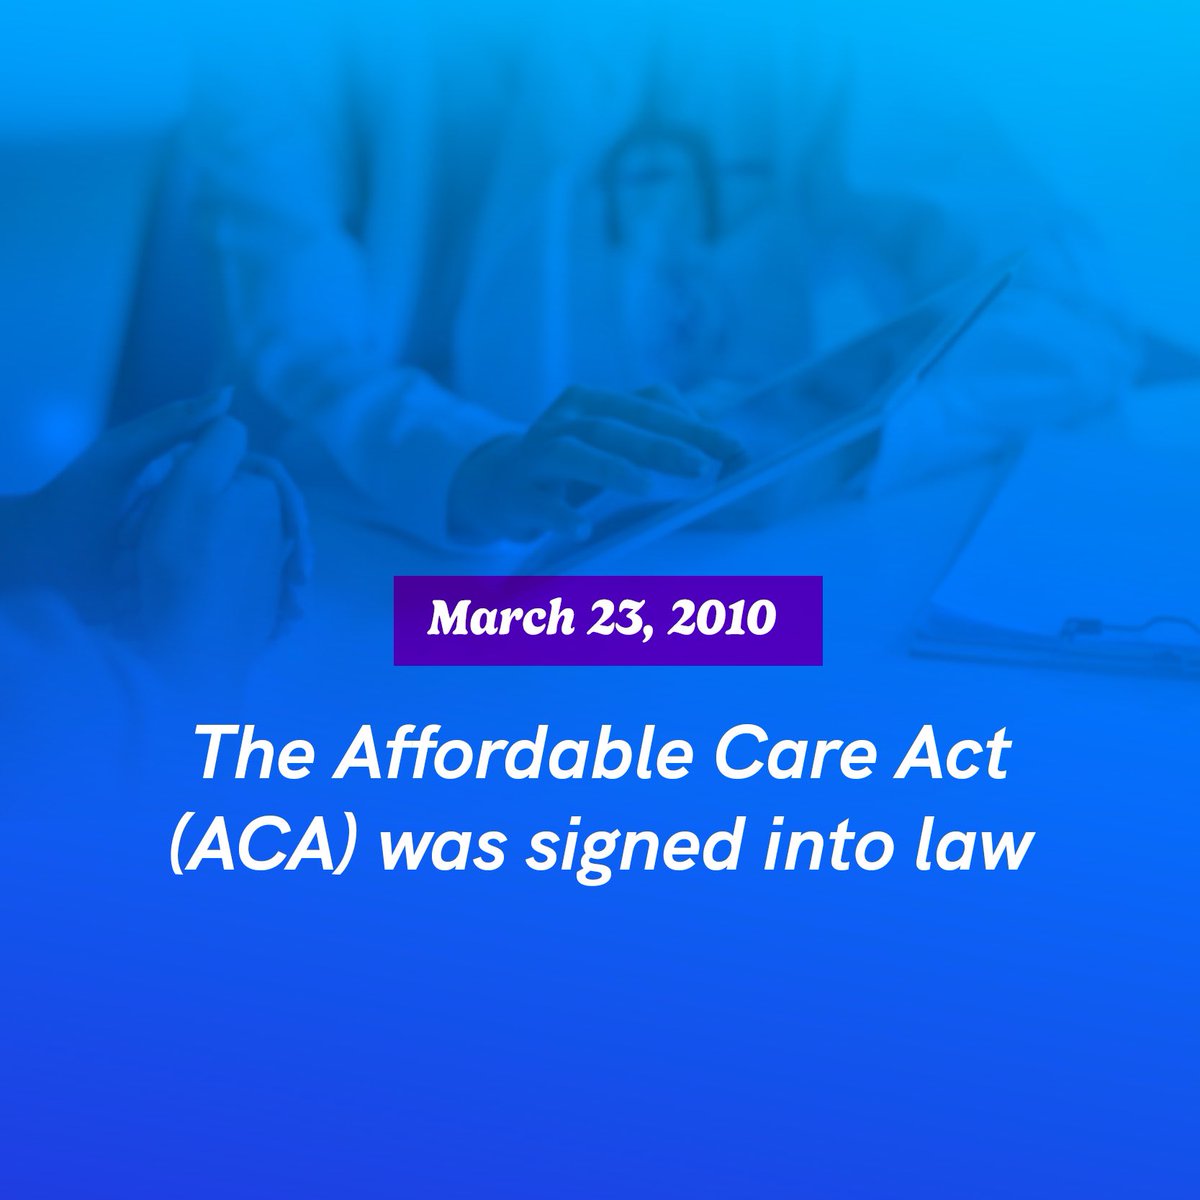 The Affordable Care Act was signed into law 14 years ago today. Thanks to the #ACA, millions of Americans have better access to affordable health care through Medicaid expansion and protections for people with pre-existing conditions. #ACA14 (1/2)